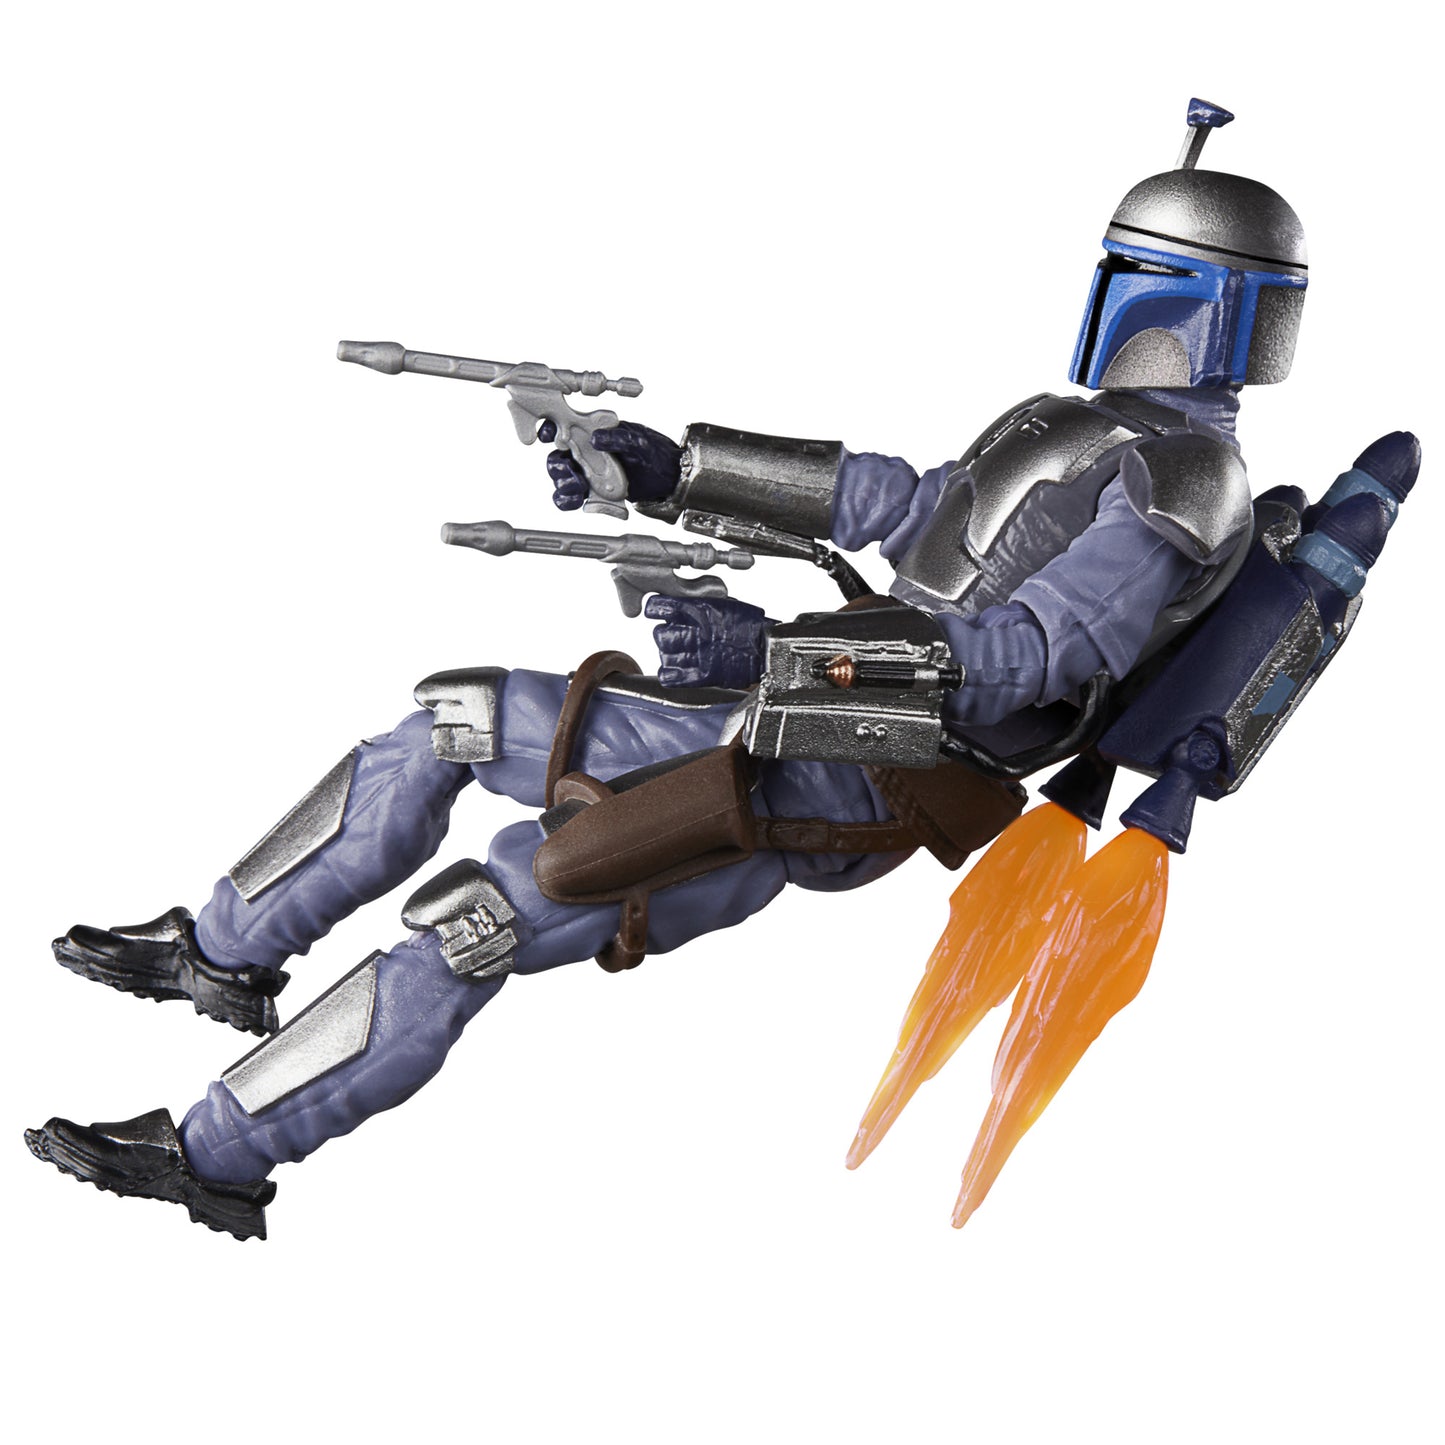 (PRE-ORDER) Star Wars Vintage Attack of the Clones - Jango Fett  - 3 3/4 Deluxe Action Figure